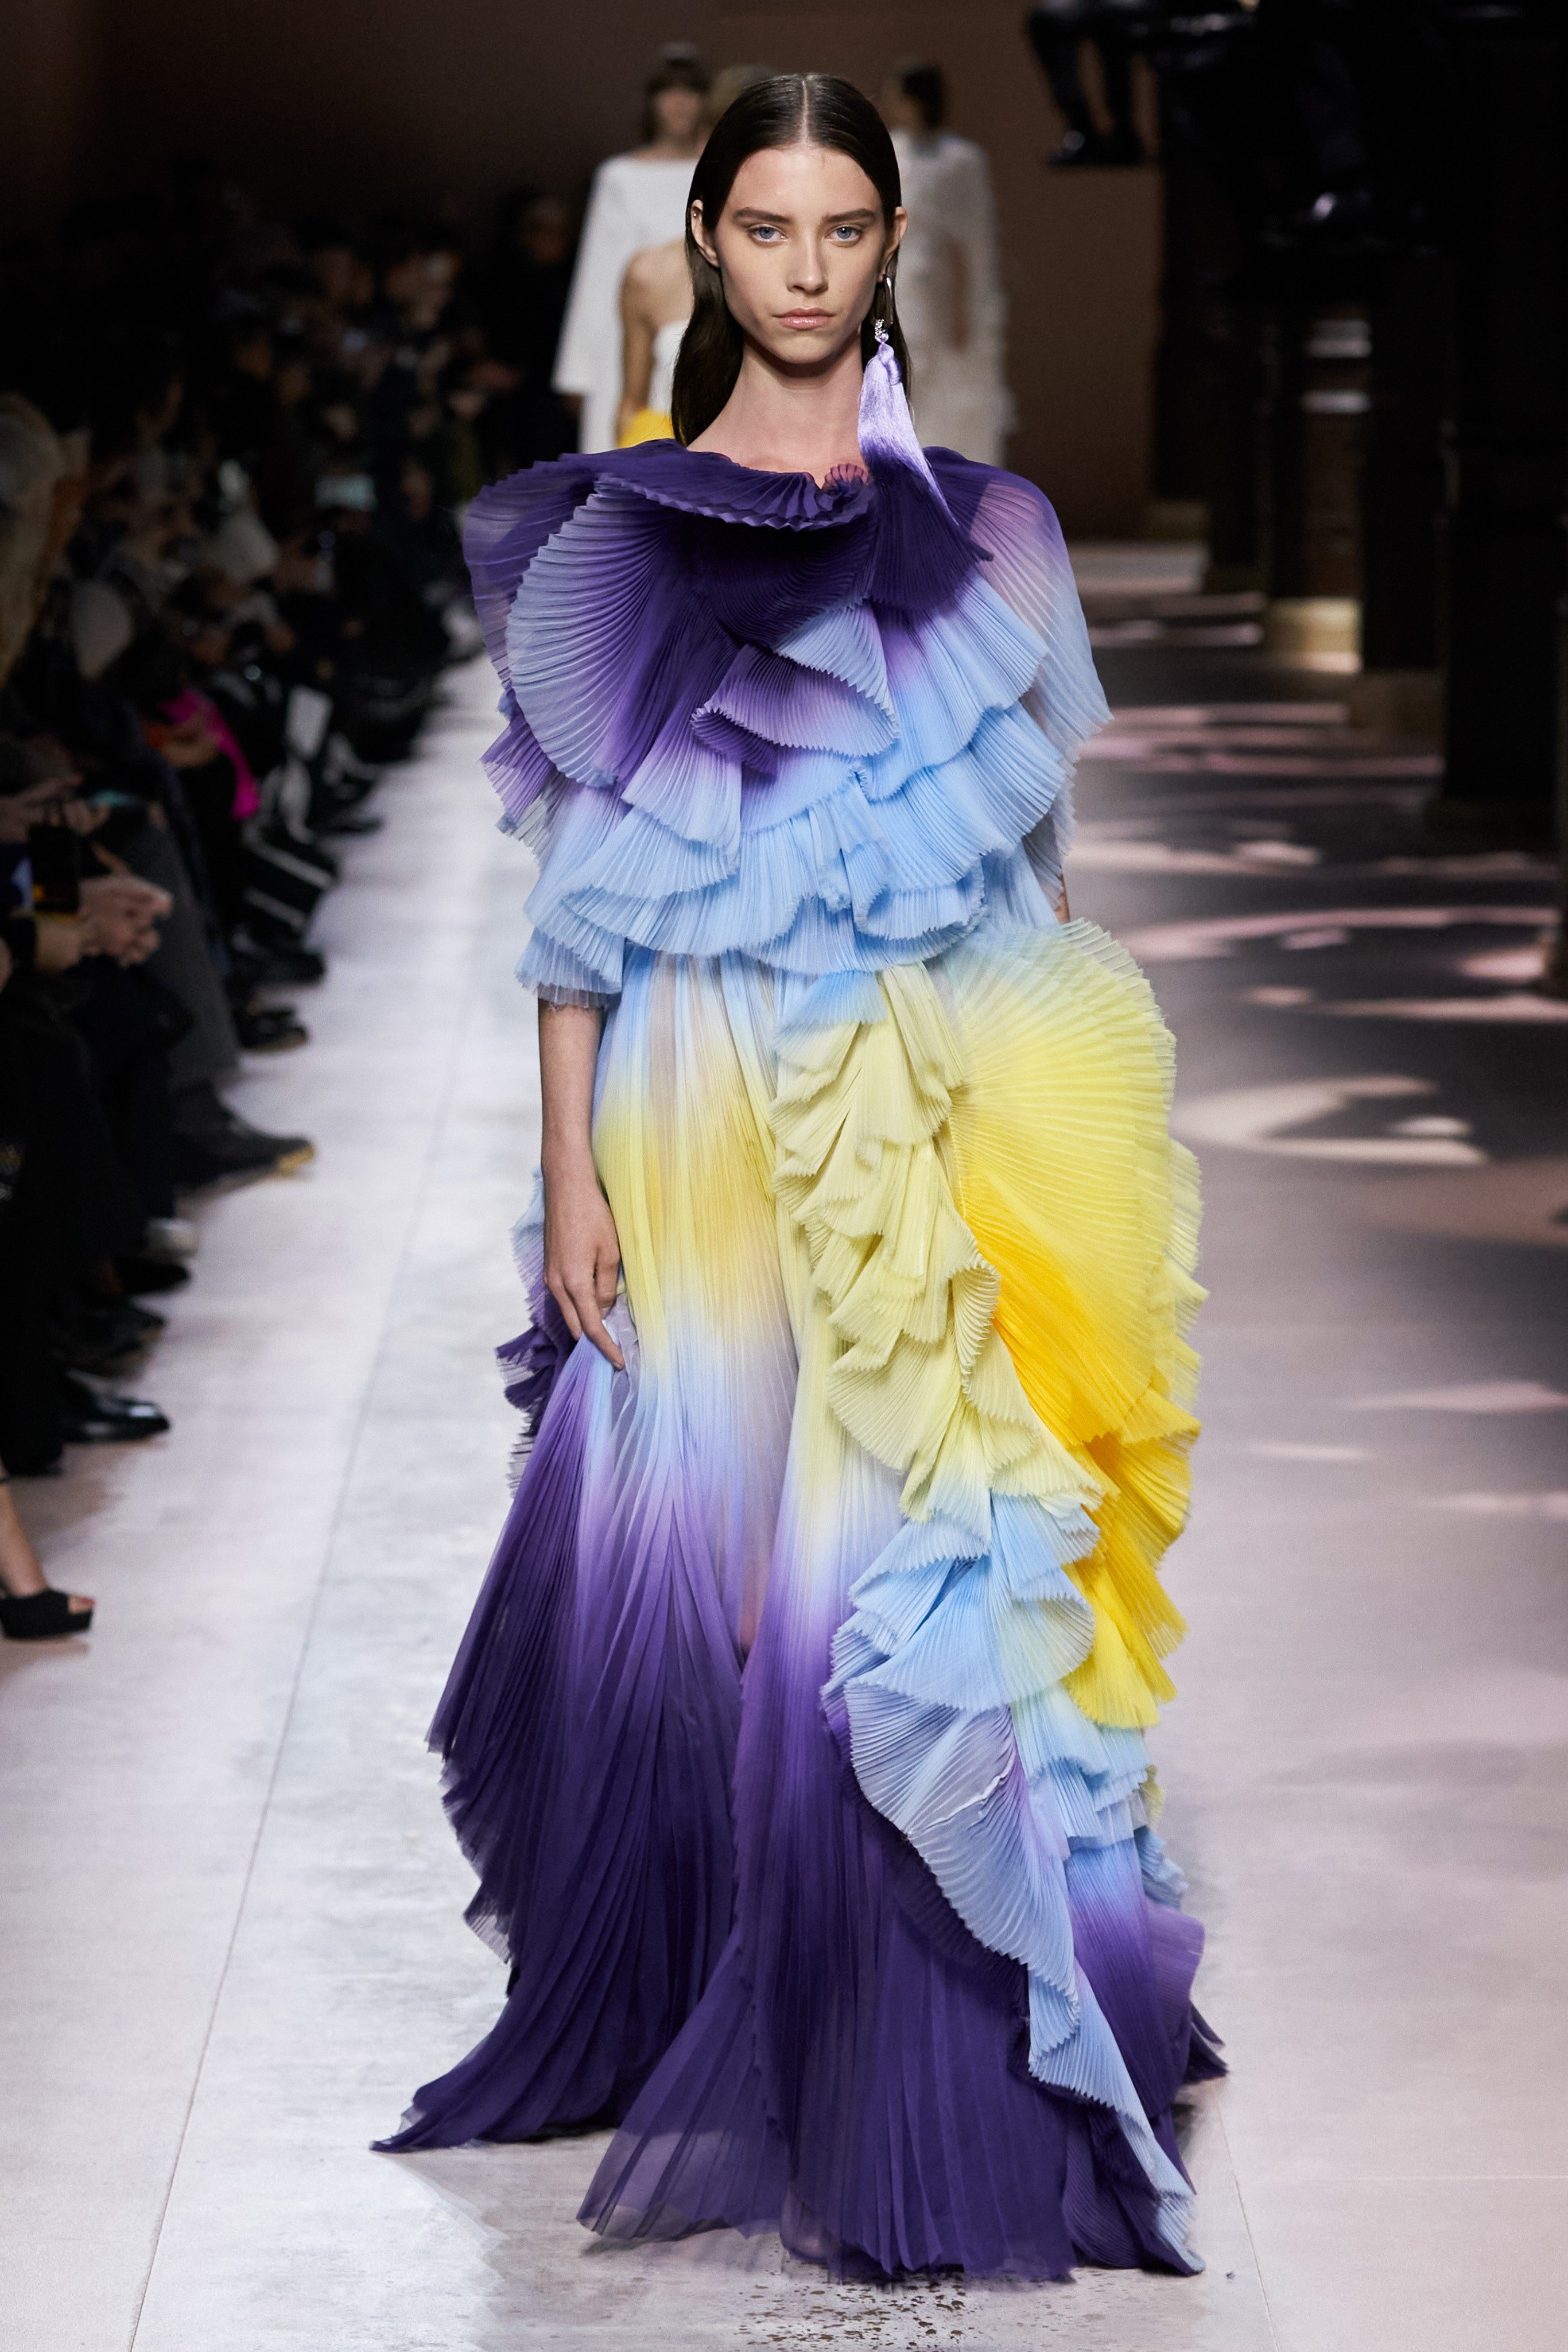 Couture collection. Коллекция Givenchy 2021 Couture. Givenchy Couture Spring 2020. Haute Couture Fashion Givenchy.